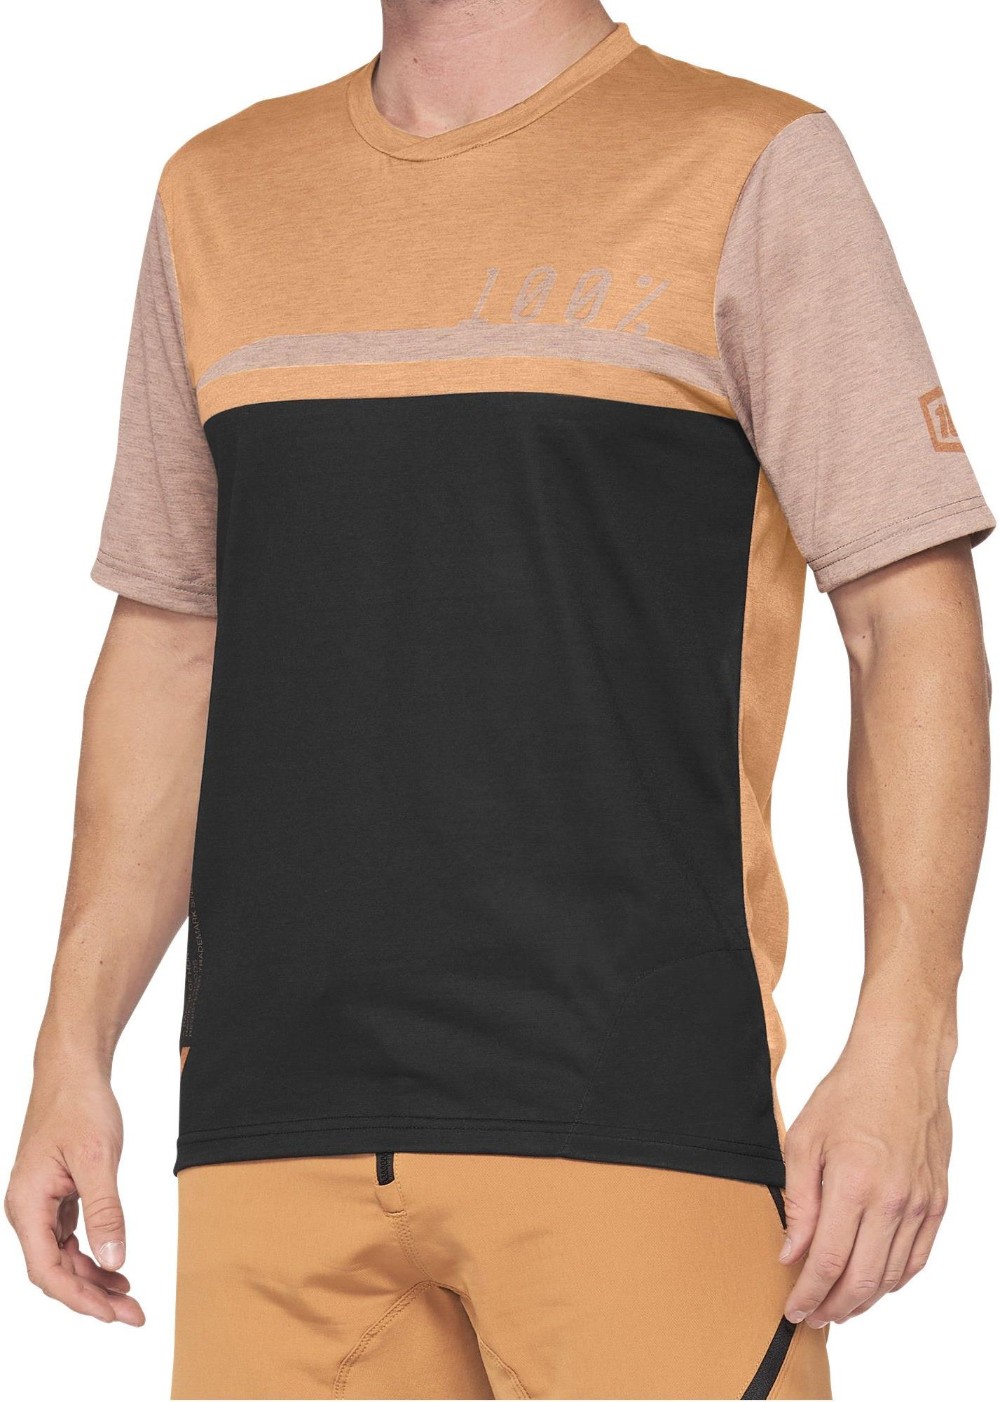 Airmatic Jersey image 0